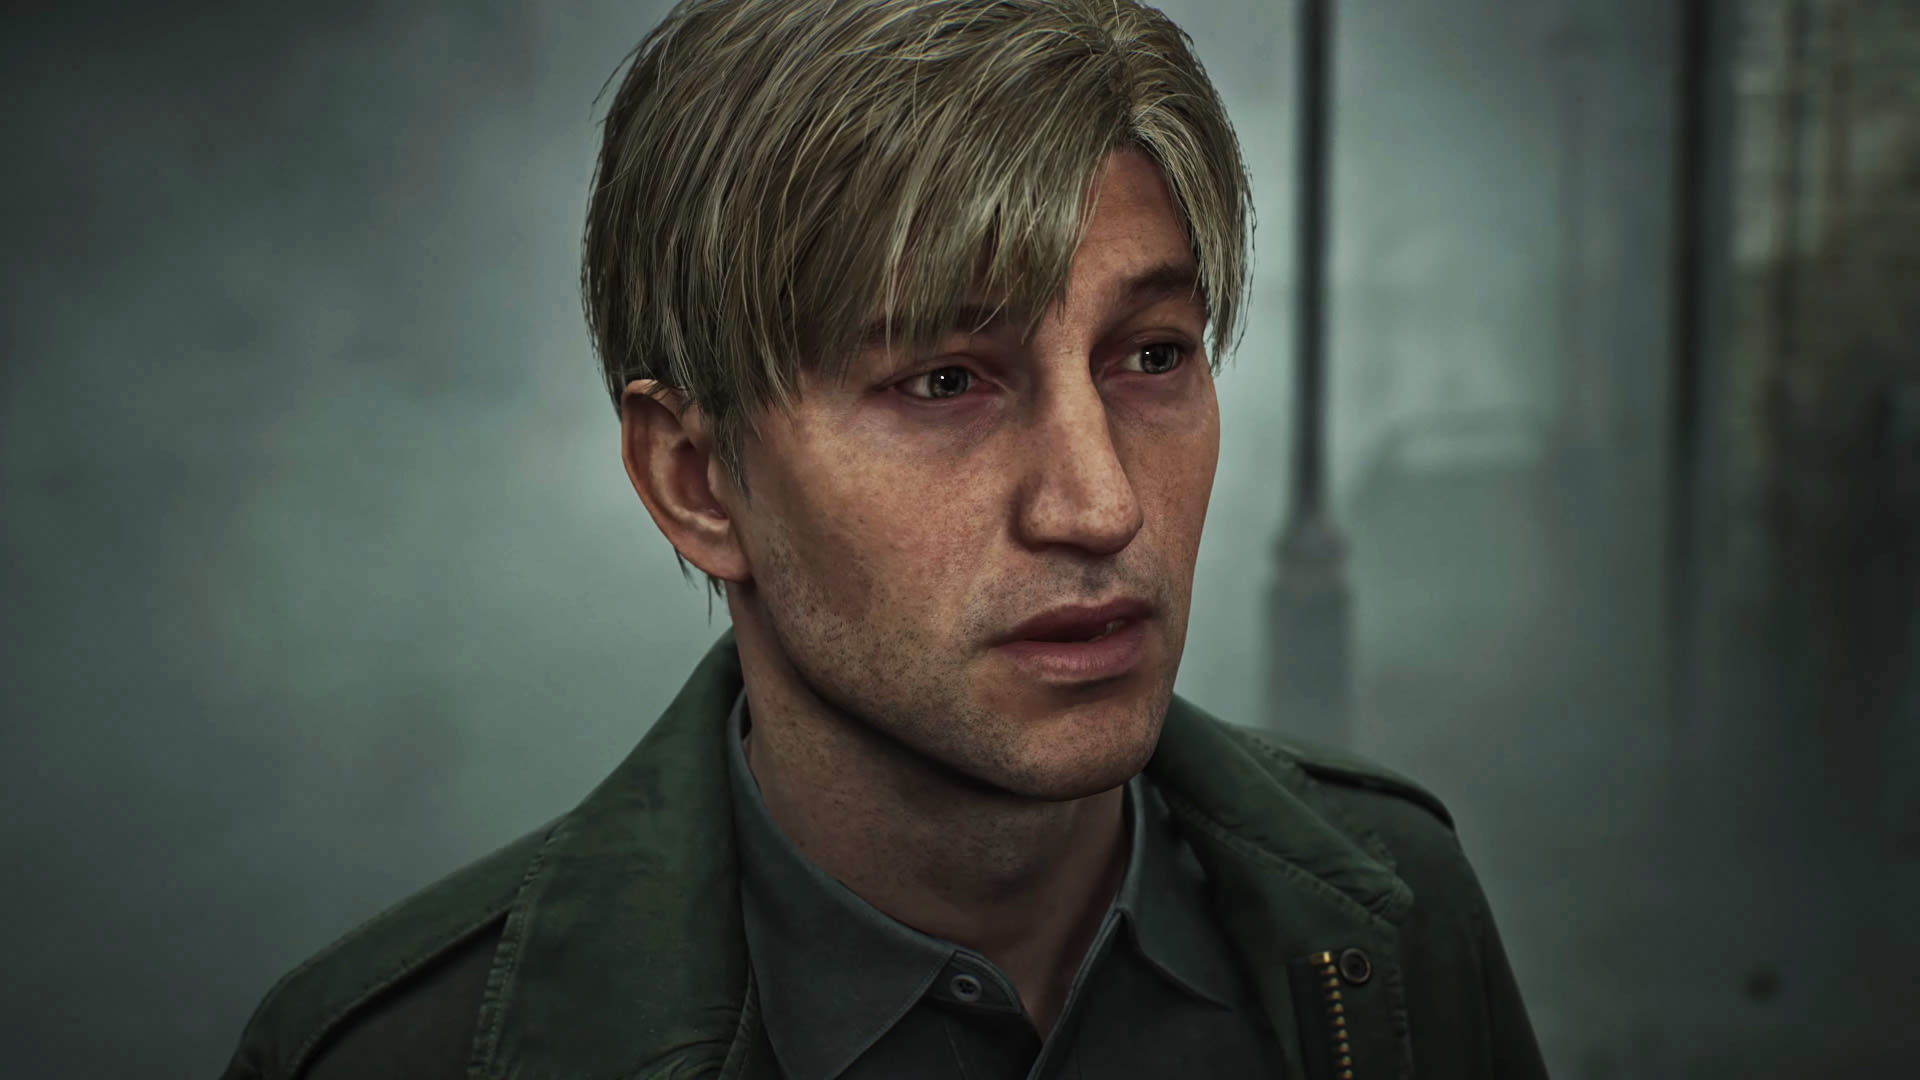 Silent Hill 2 Remake Gets an October Release Date and 13 Minutes of Tense Gameplay